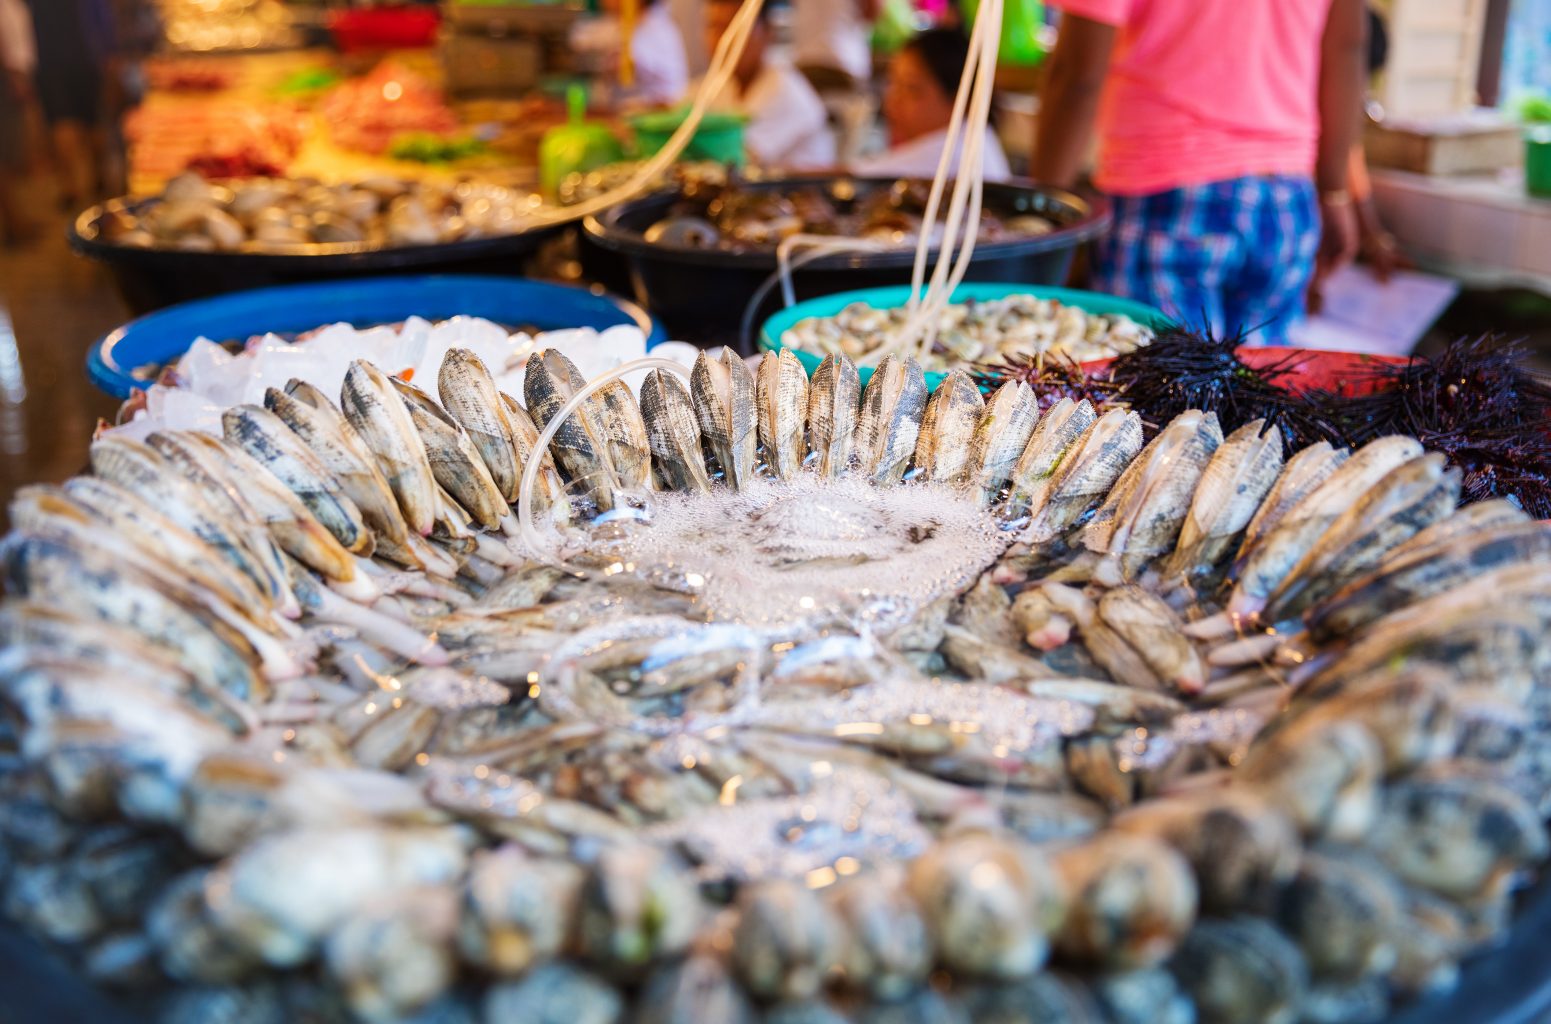 Shellfish for sale at an Asian market